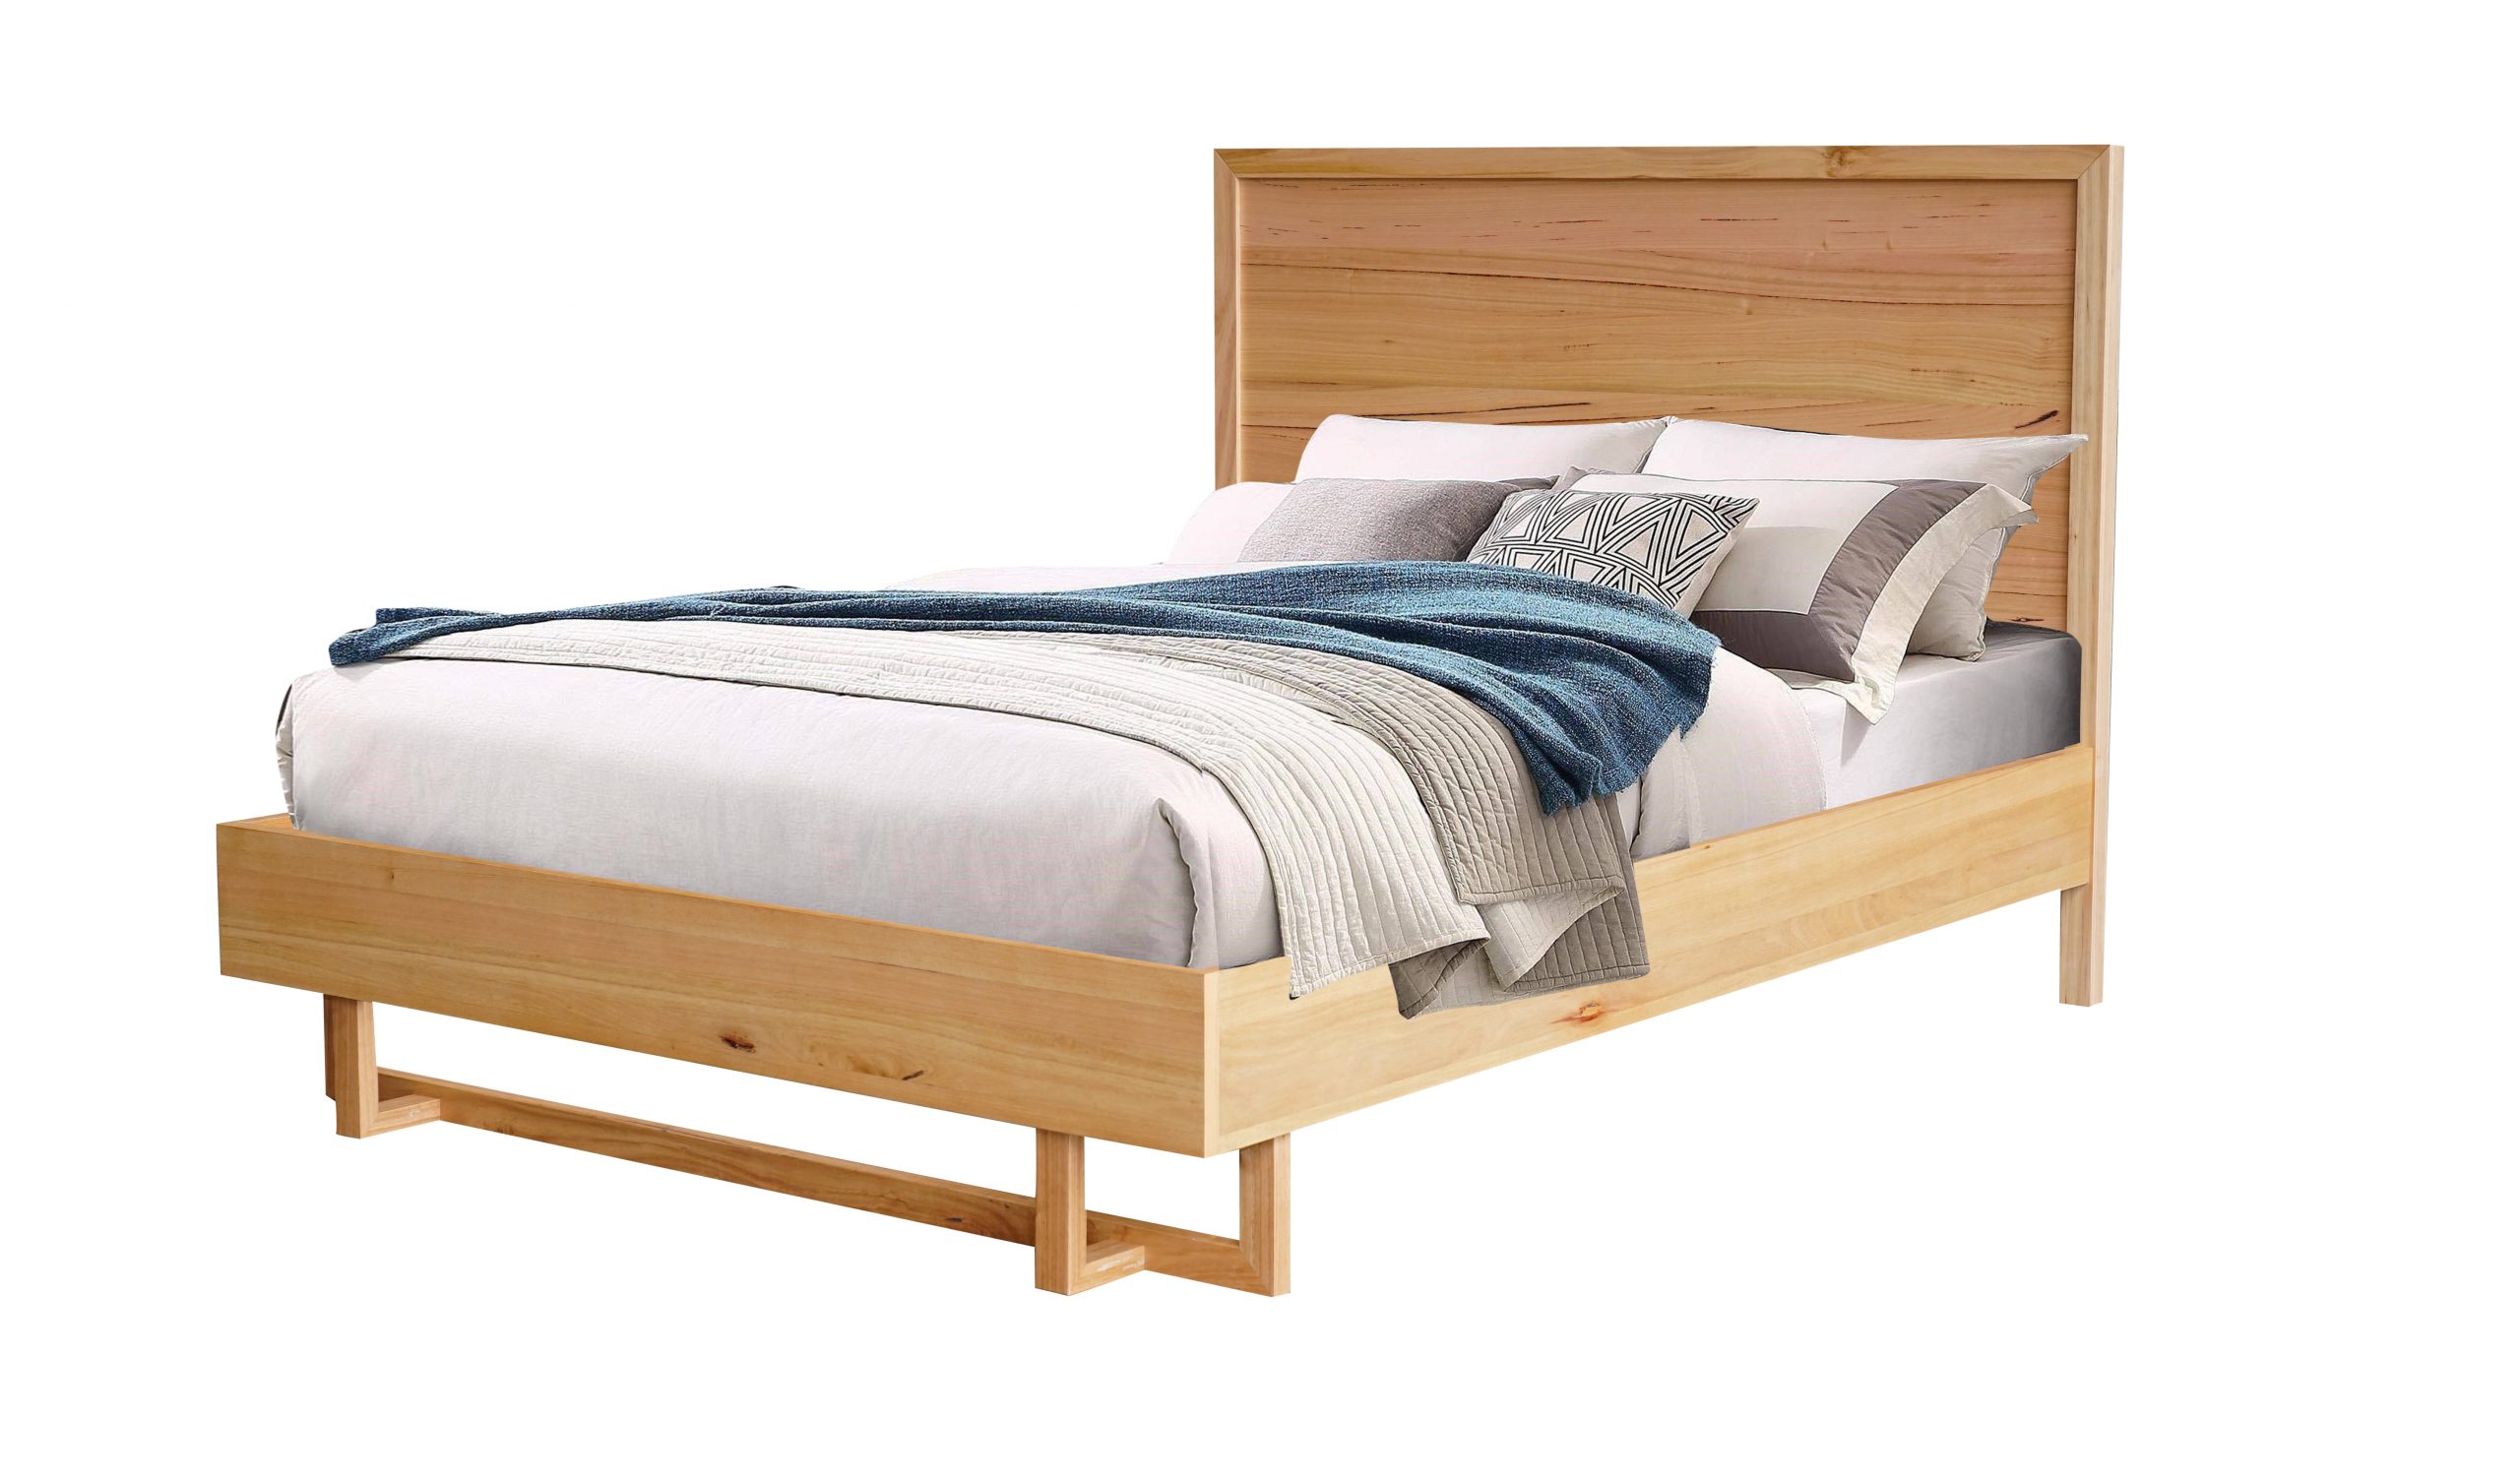 DANTE BED scaled 1 - Dante King Bed - Messmate